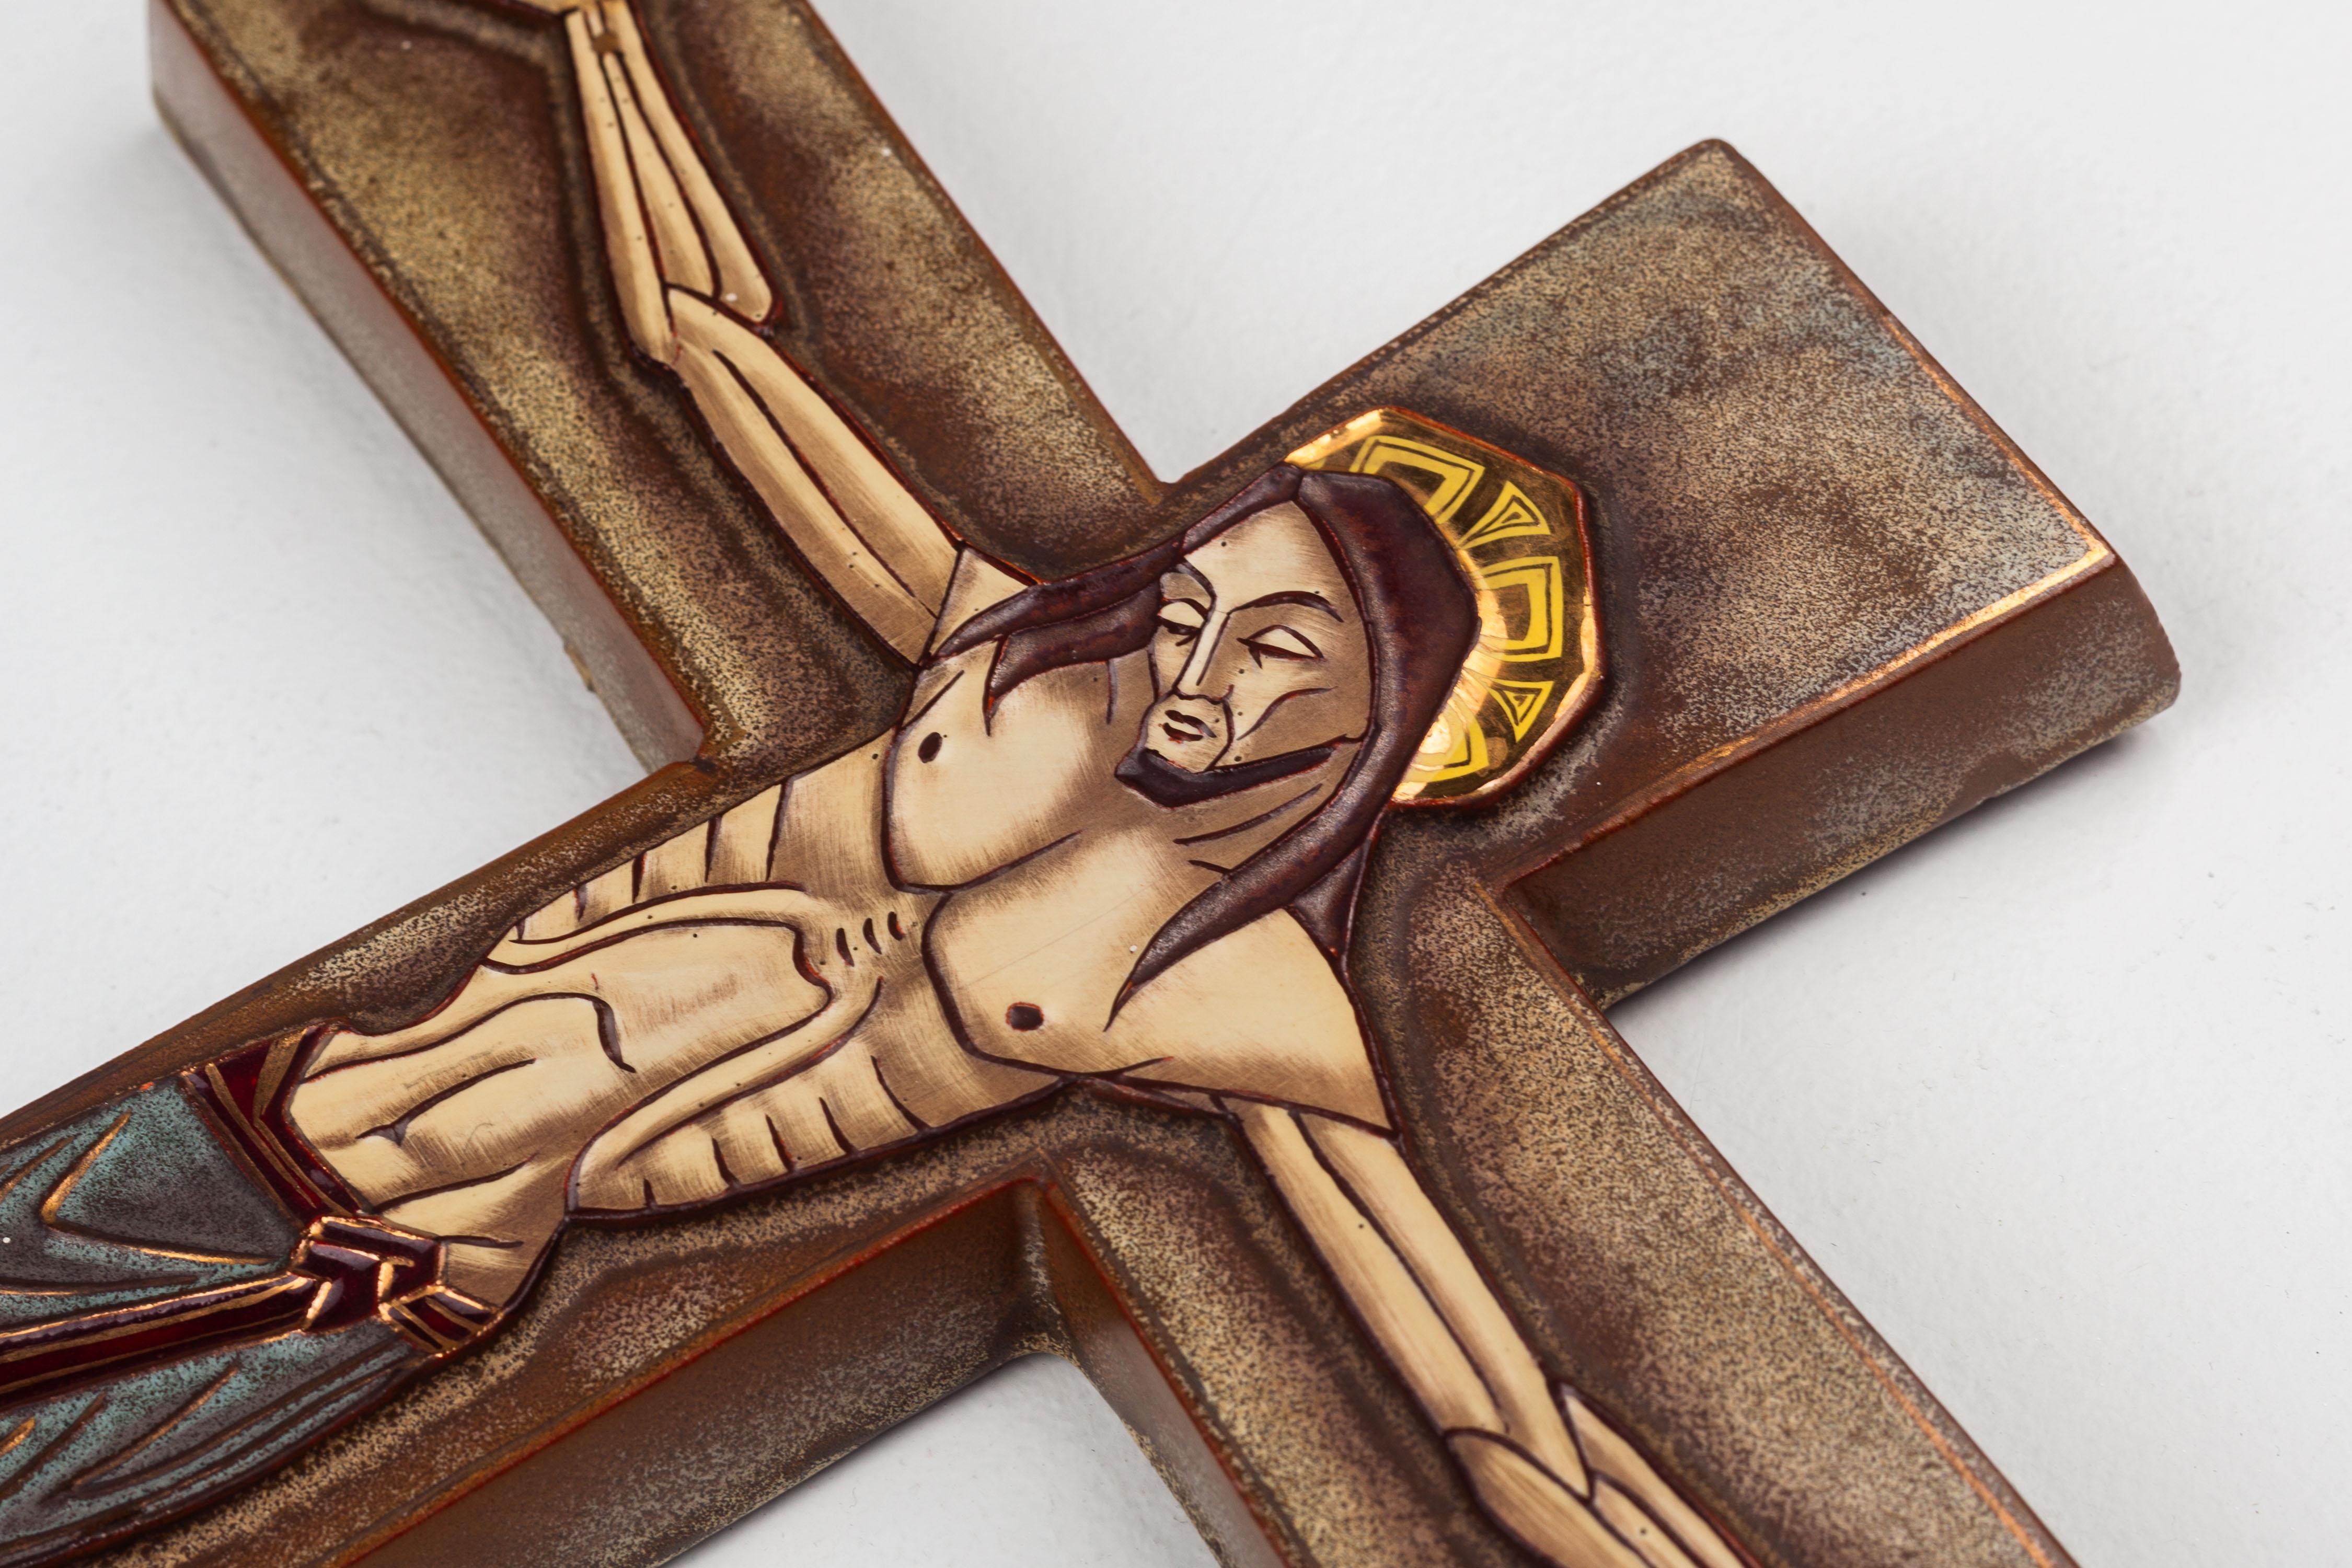 This modernist wall cross features an exceptional Art Deco styled relief rendering of the figure of Jesus Christ, exuding serenity and majesty. It boasts an elaborated earthy color palette with precise shadings, intricate drapings, and uplifting